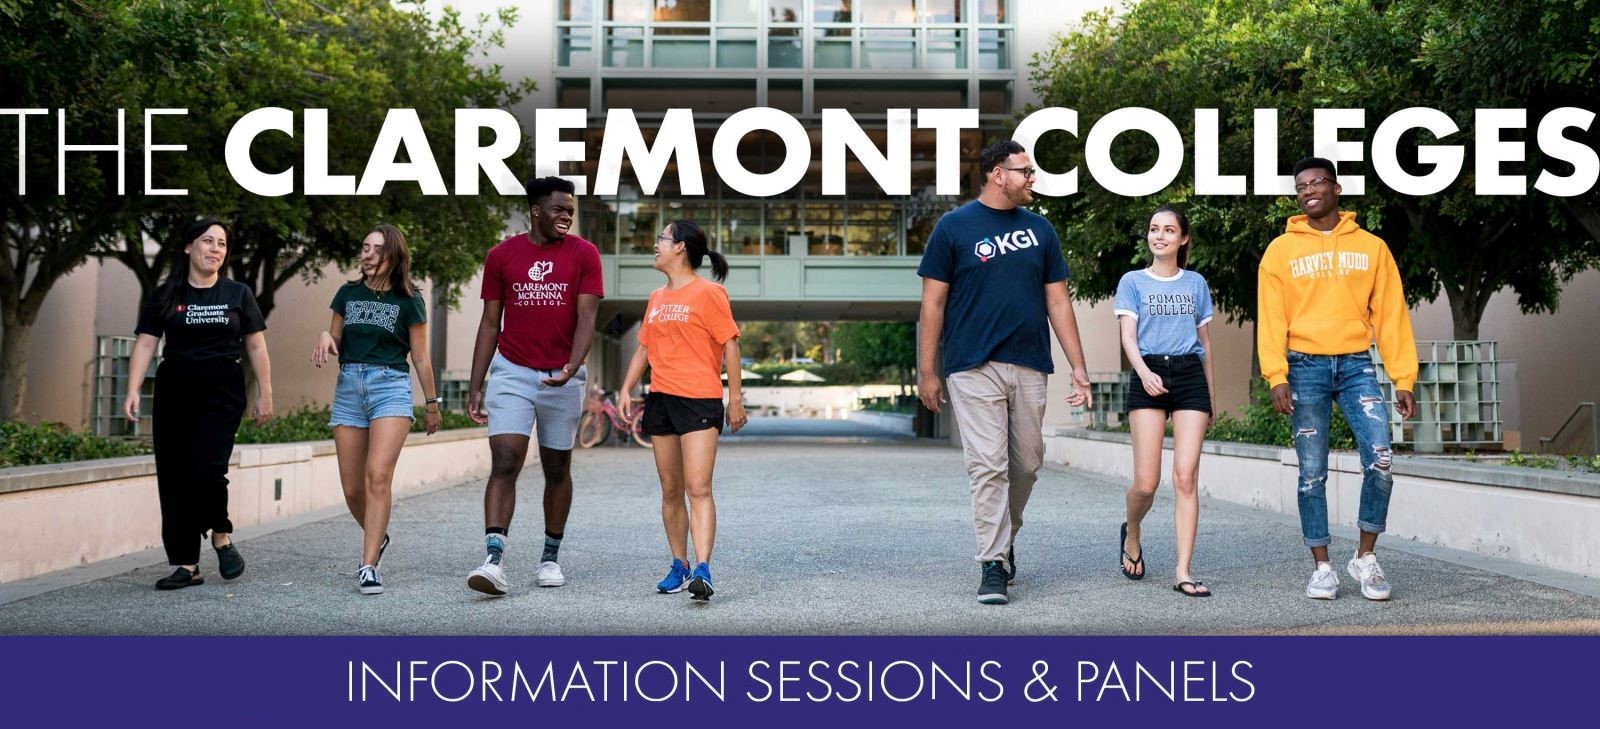 The Claremont Colleges Information Sessions and Panels